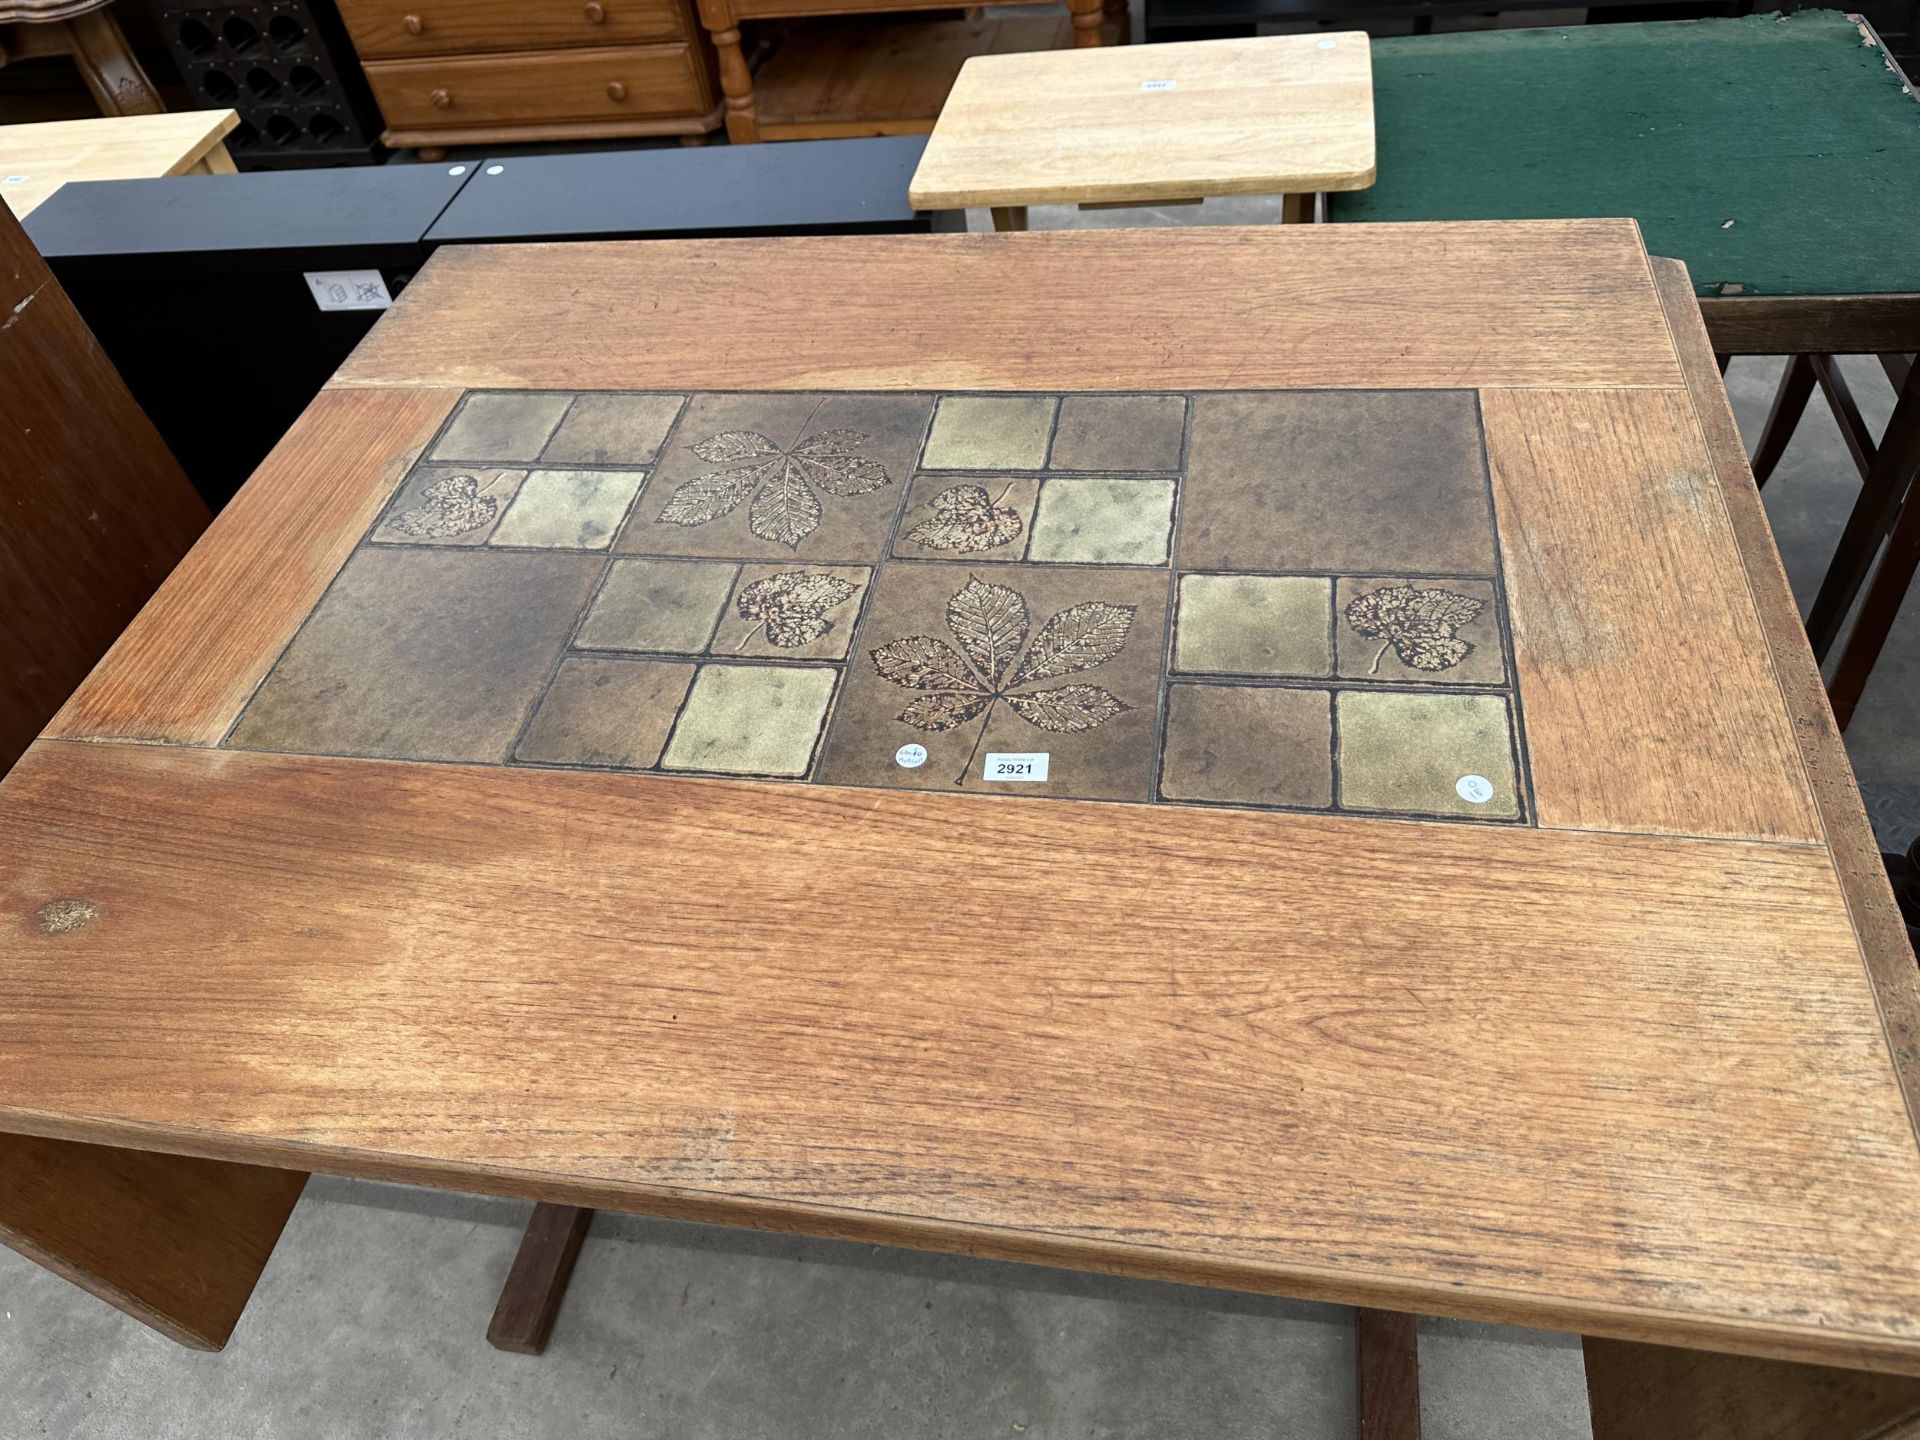 A RETRO TEAK GANSO MOBLER DROP-LEAF DINING TABLE WITH TILED TOP, 75" X 36" OPENED - Image 2 of 5